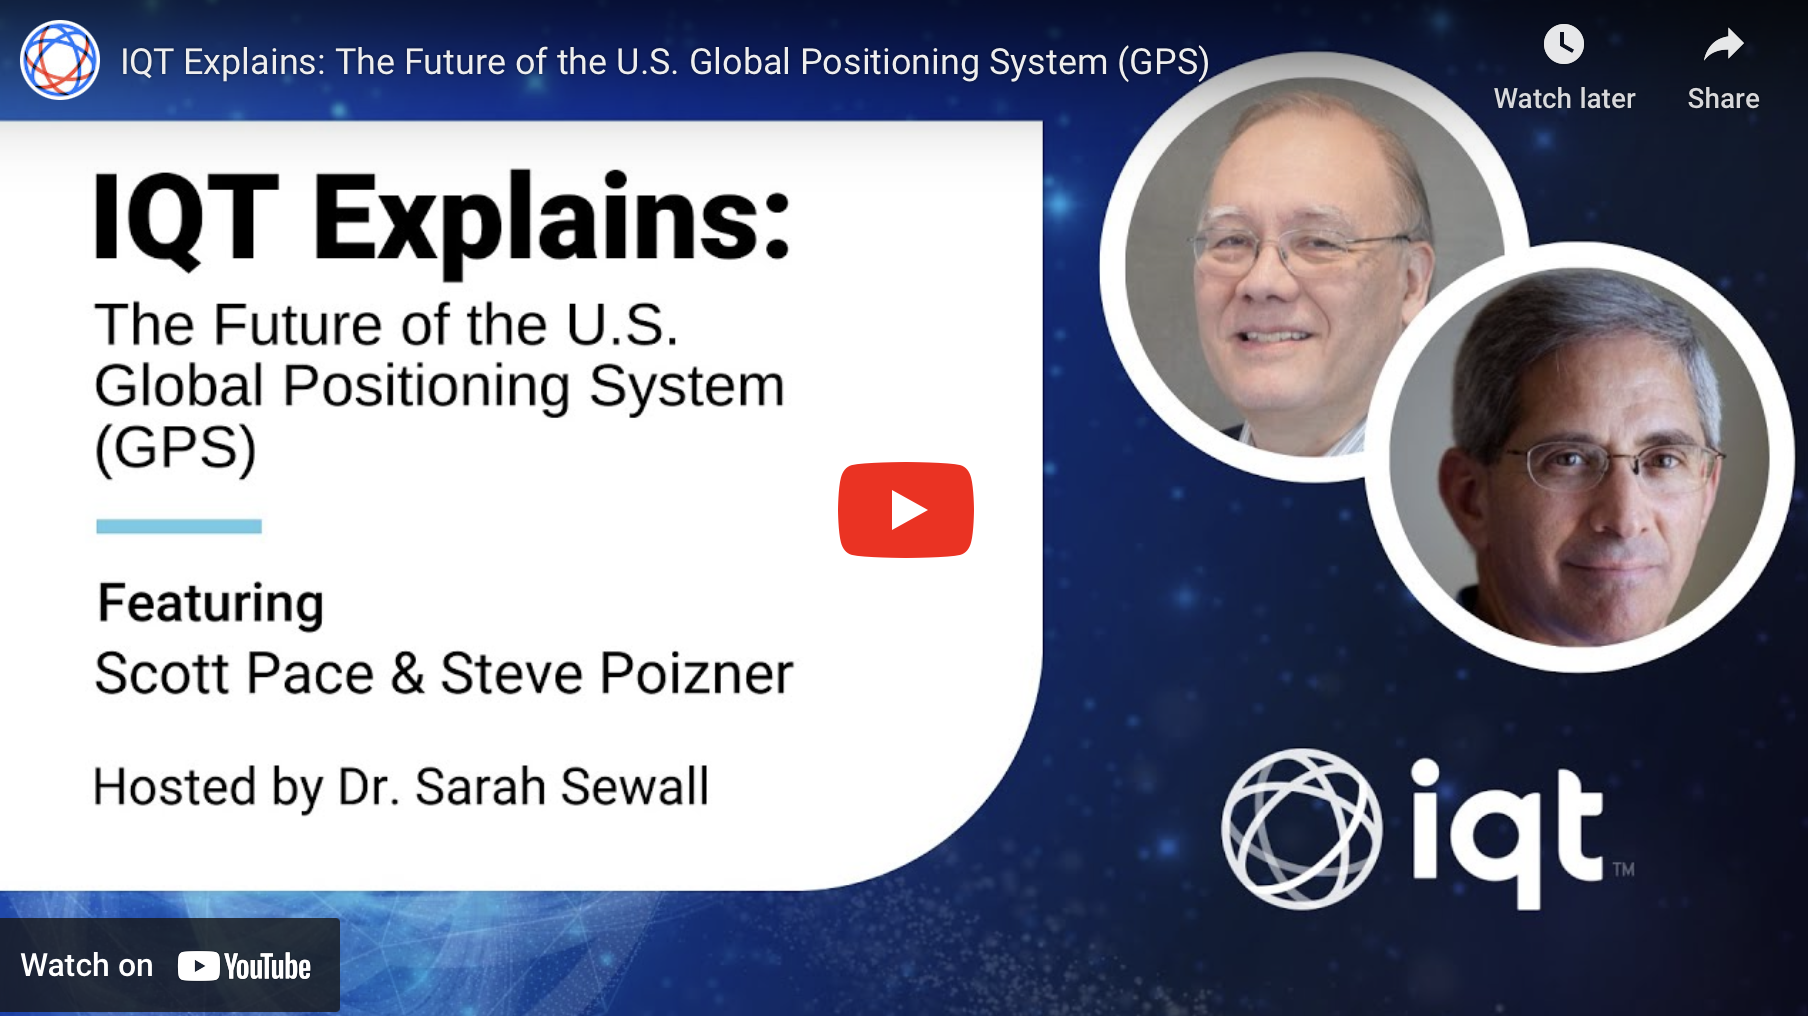 Youtube Thumbnail of this IQT Episode, "IQT Explains: The Future of the U.S. Global Positioning System (GPS); Featuring Scott Pace & Steve Poizner, Hosted by Dr. Sarah Sewall"